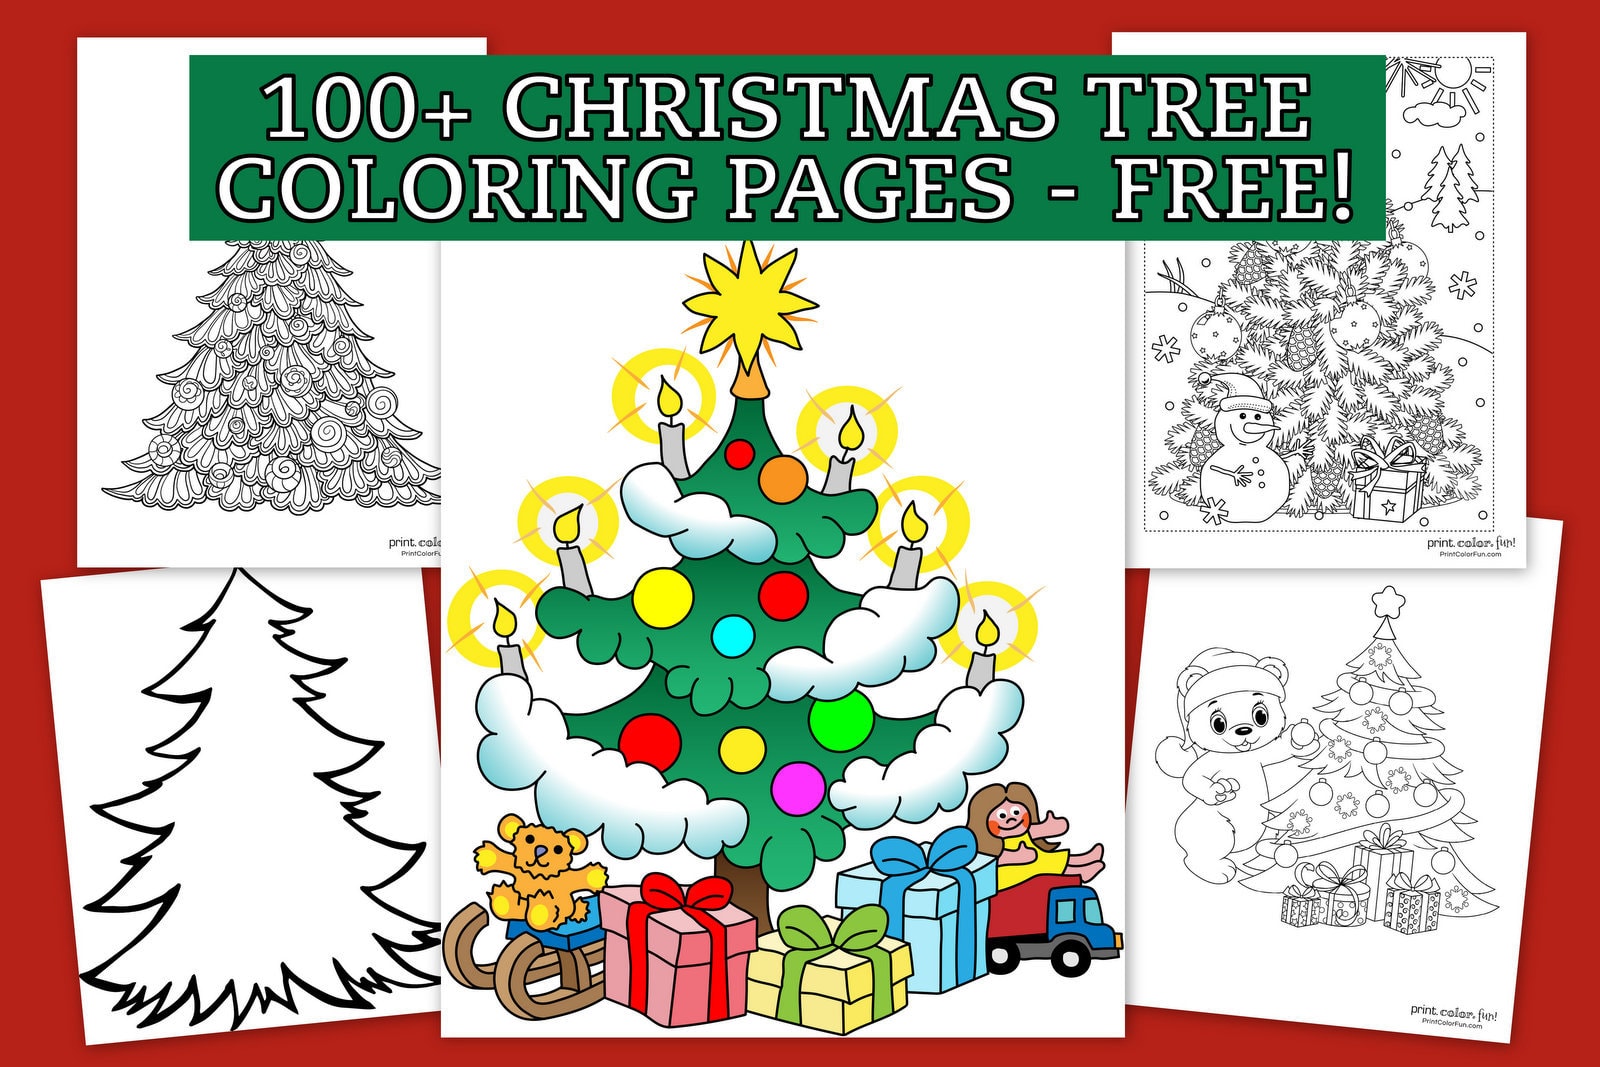 Top 20 Christmas tree coloring pages The ultimate free ...